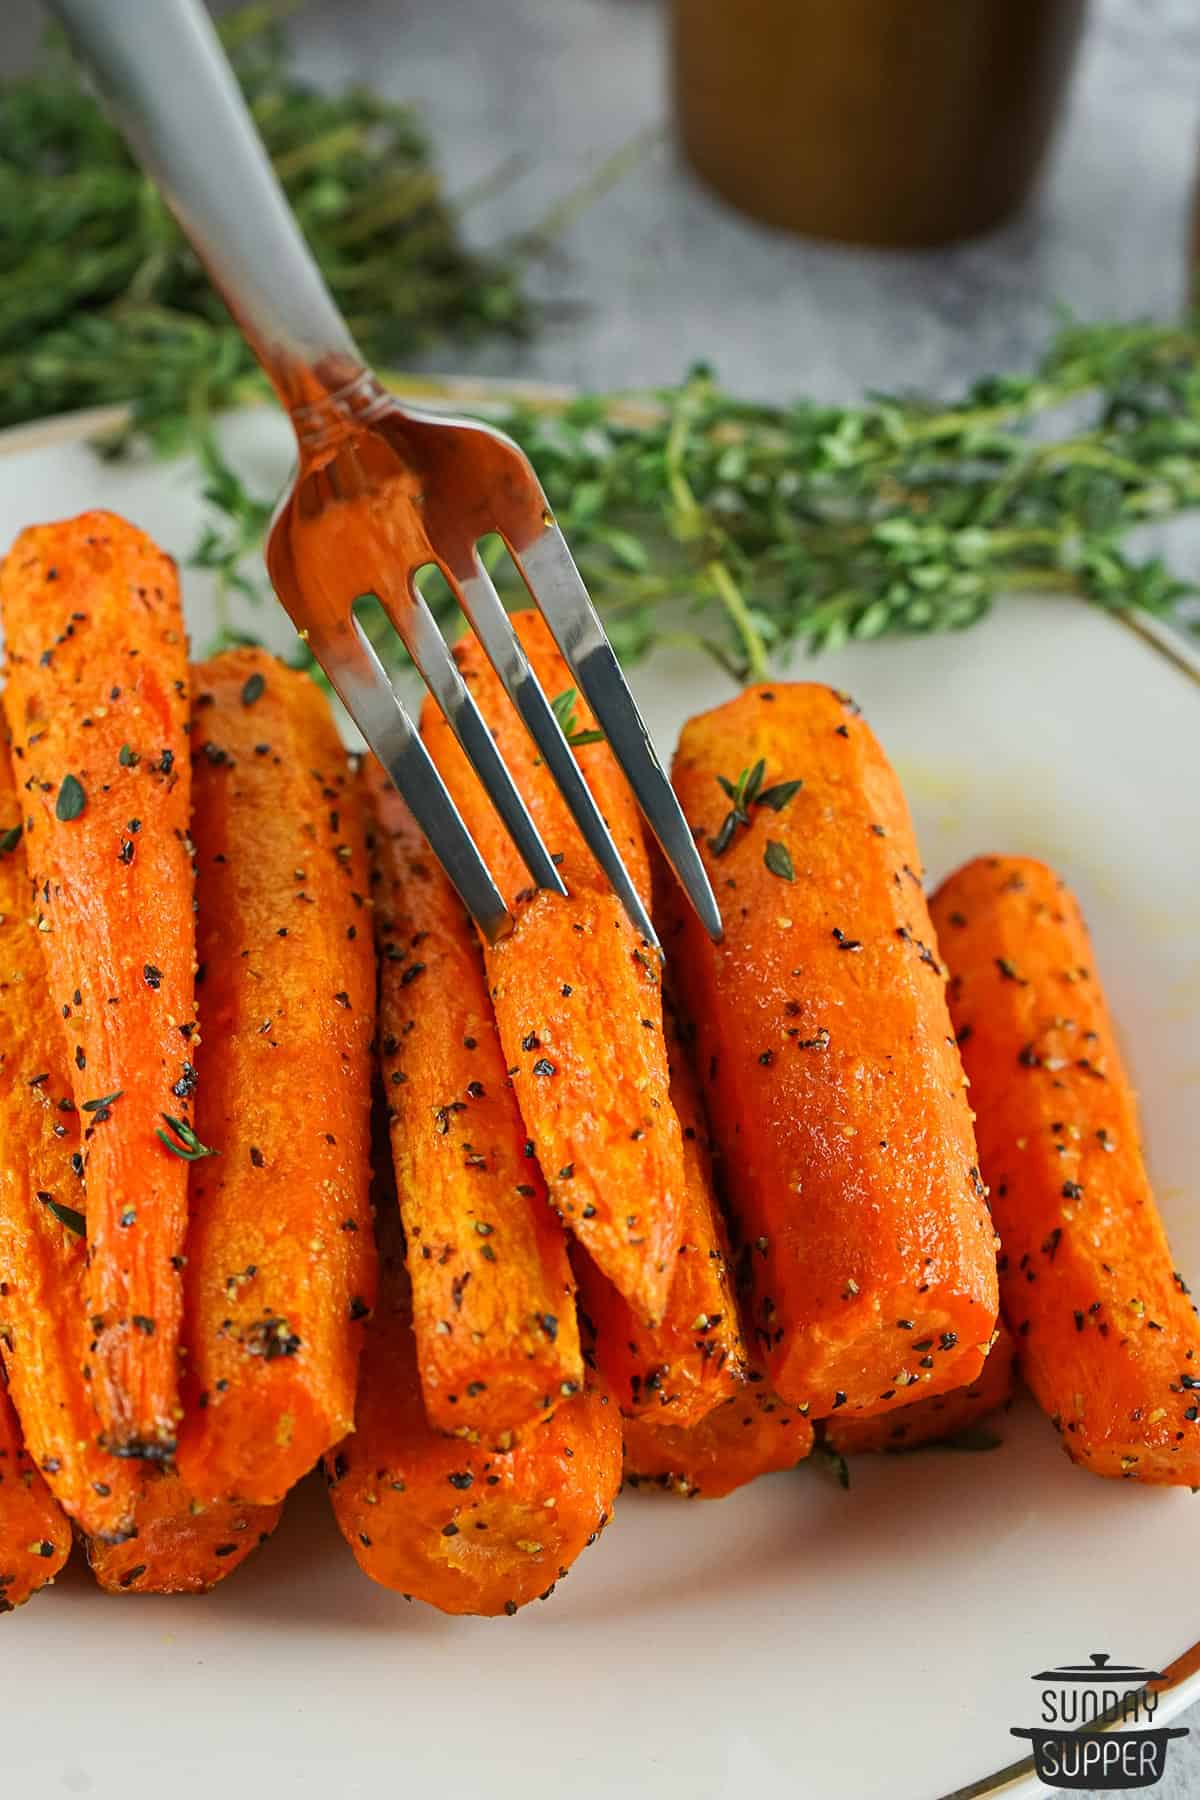 a fork taking an air fried carrot from a plate of carrots